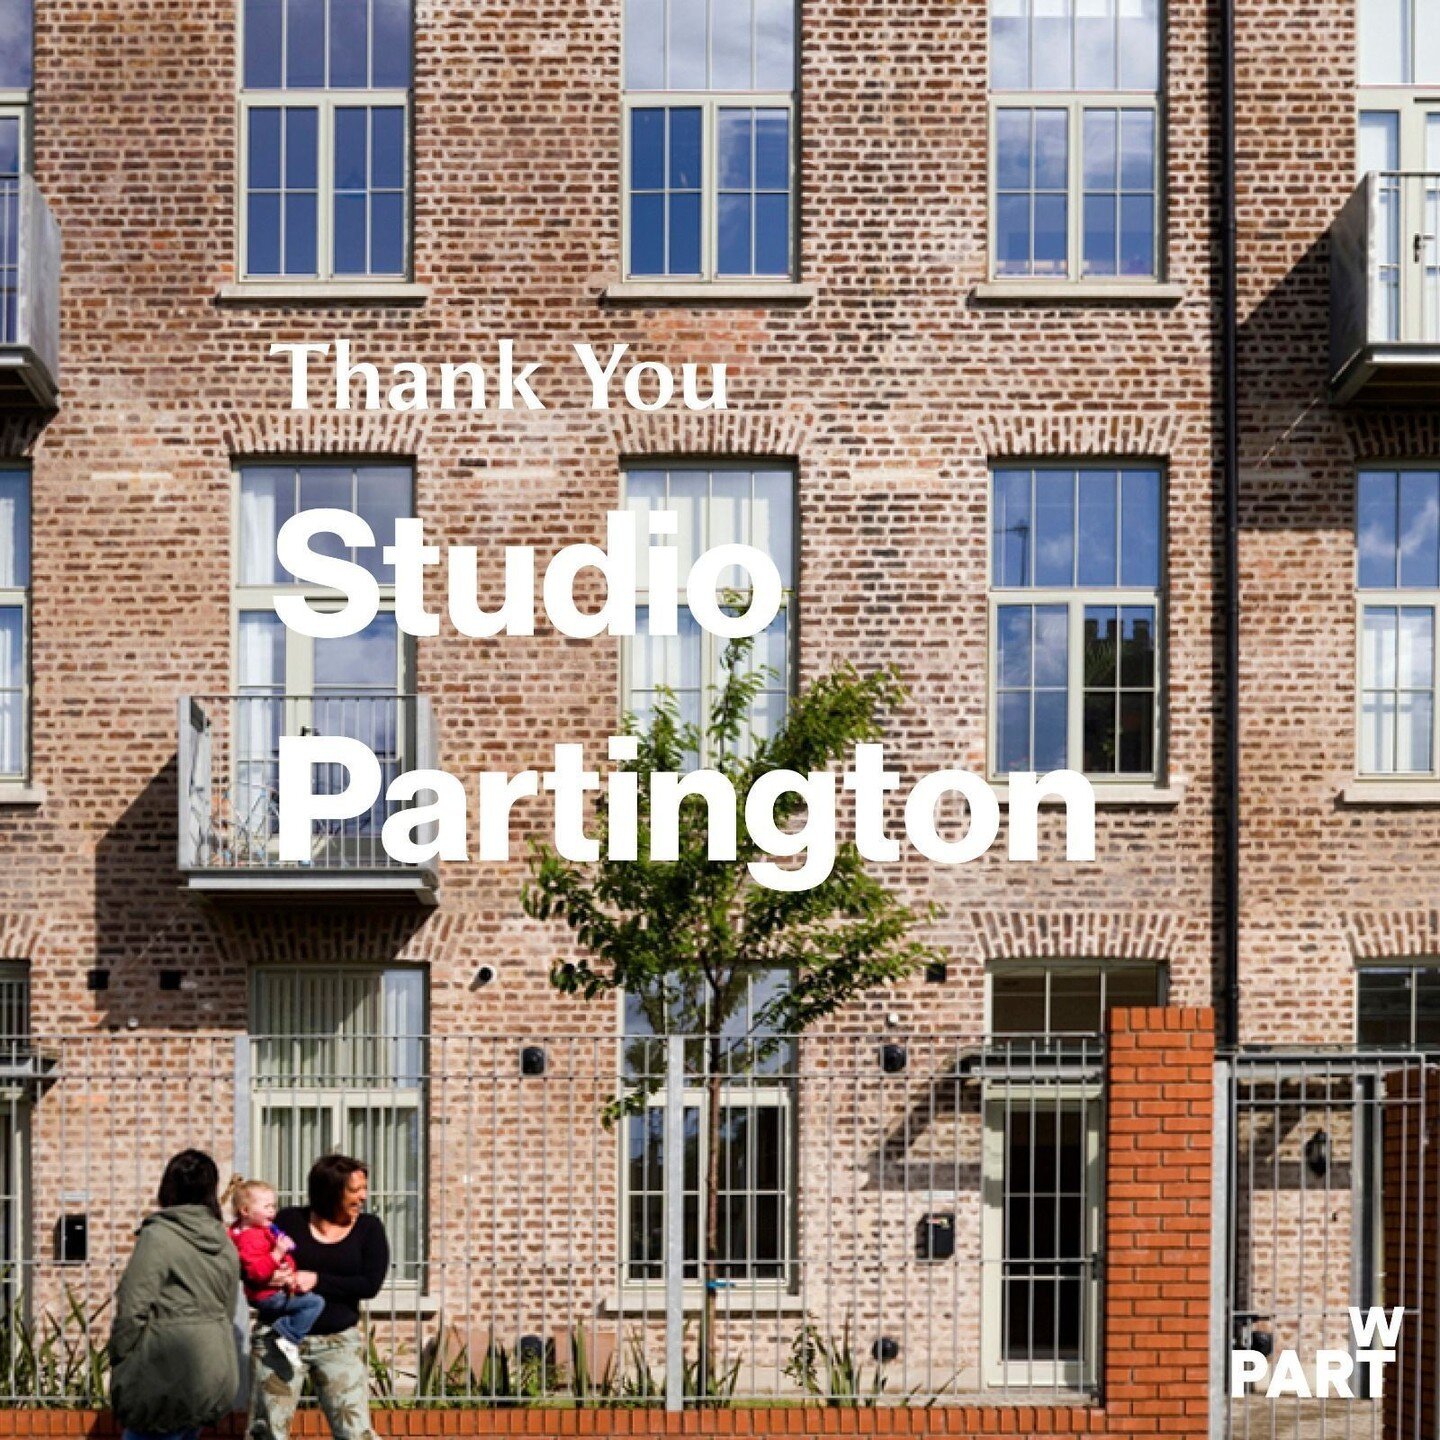 Studio Partington, thank you so much for donating to our #WomensWork project! This is a generous donation that helps us share the work of women in creating London's buildings, places and spaces. Thank you @studiopartington! 

You can help too by by m